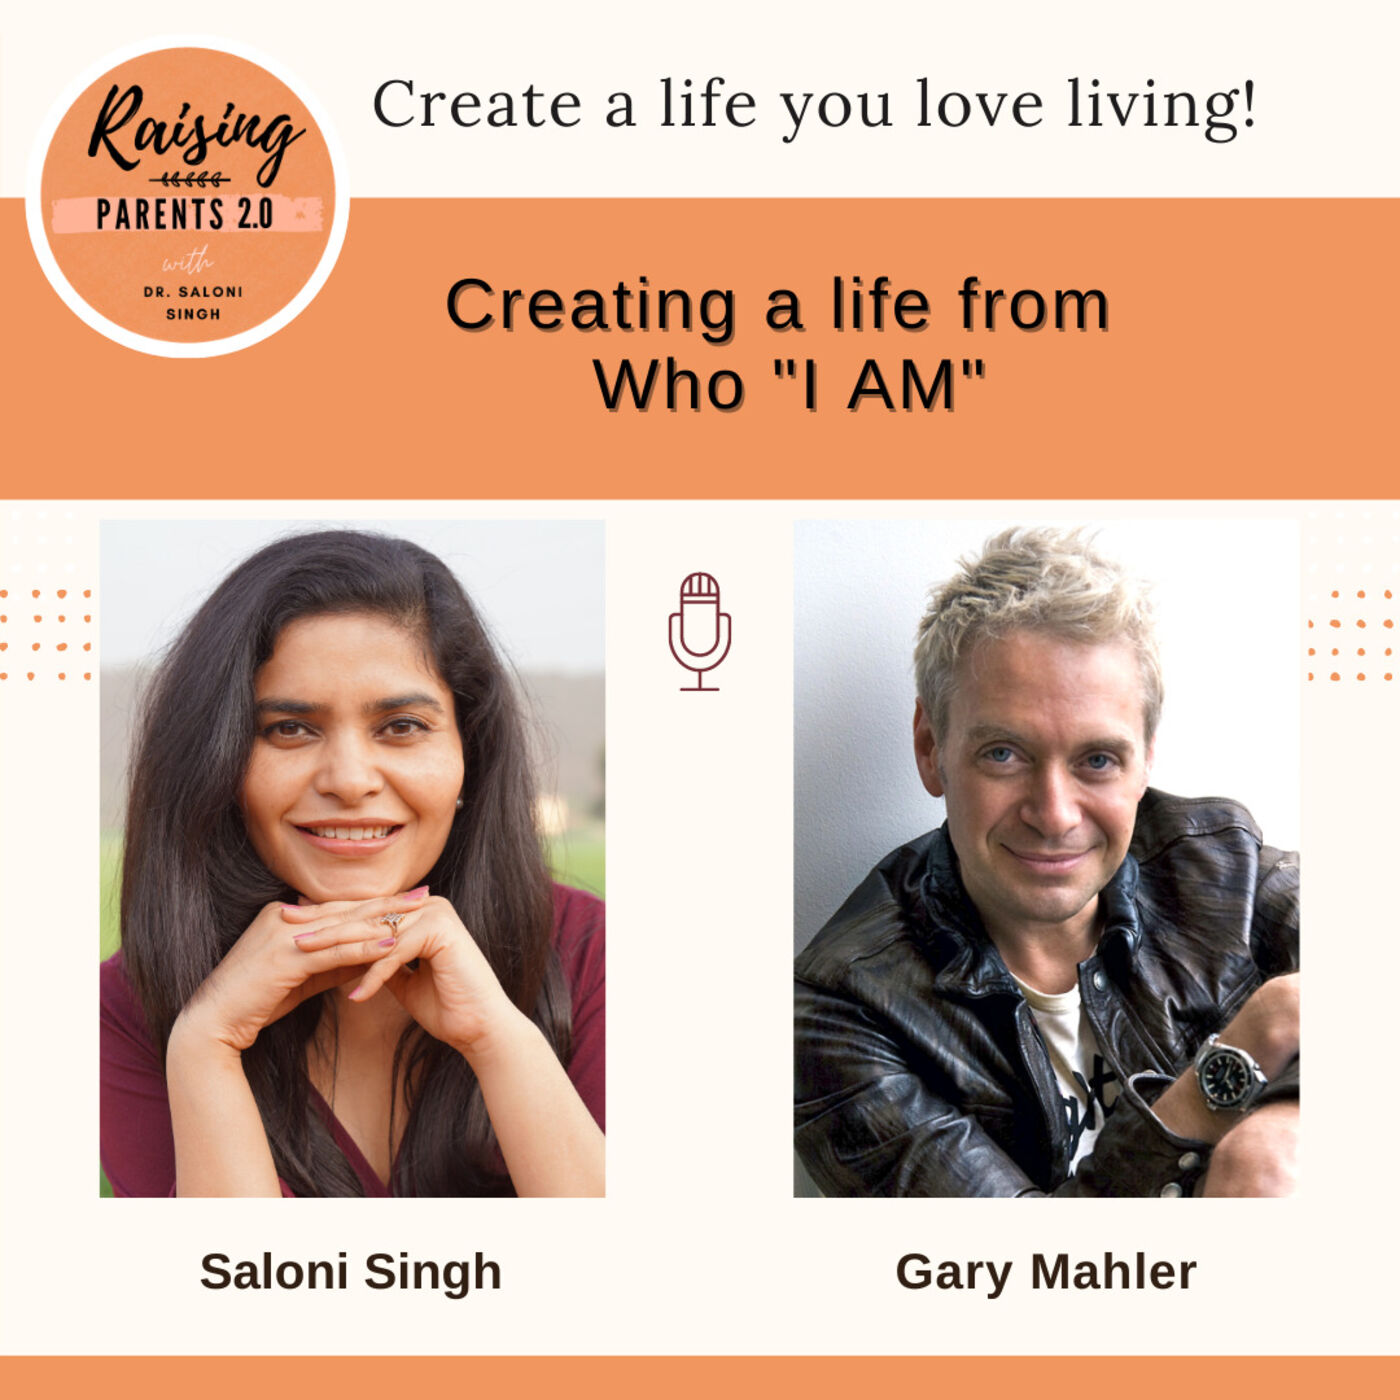 Creating a life from who 'I AM' with Gary Mahler